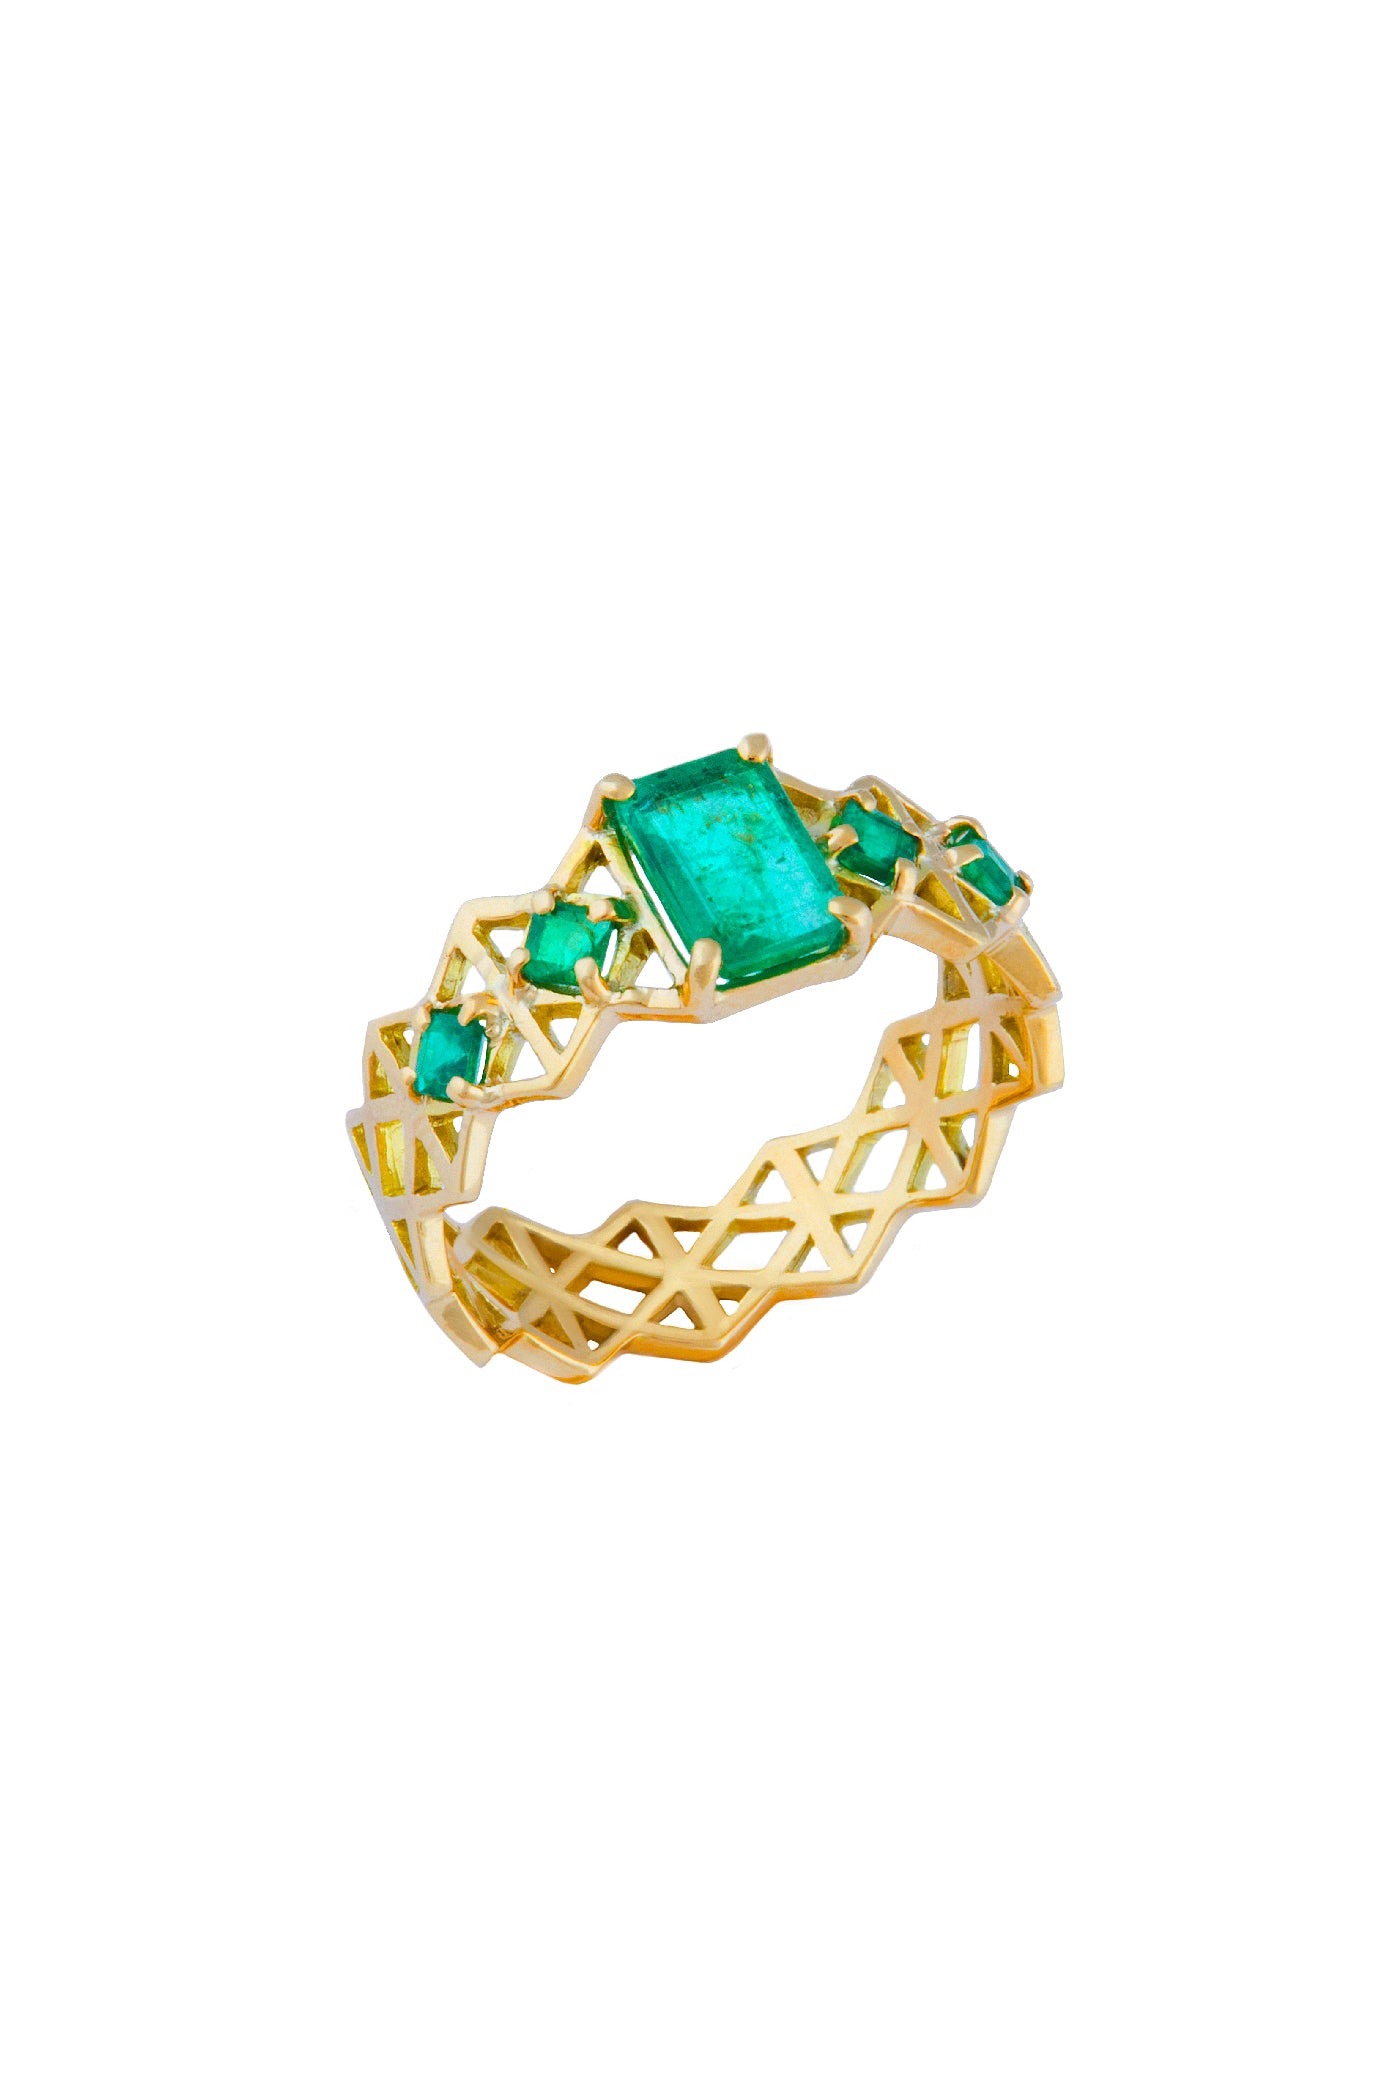 Solid Gold Life force ring with central emerald stone